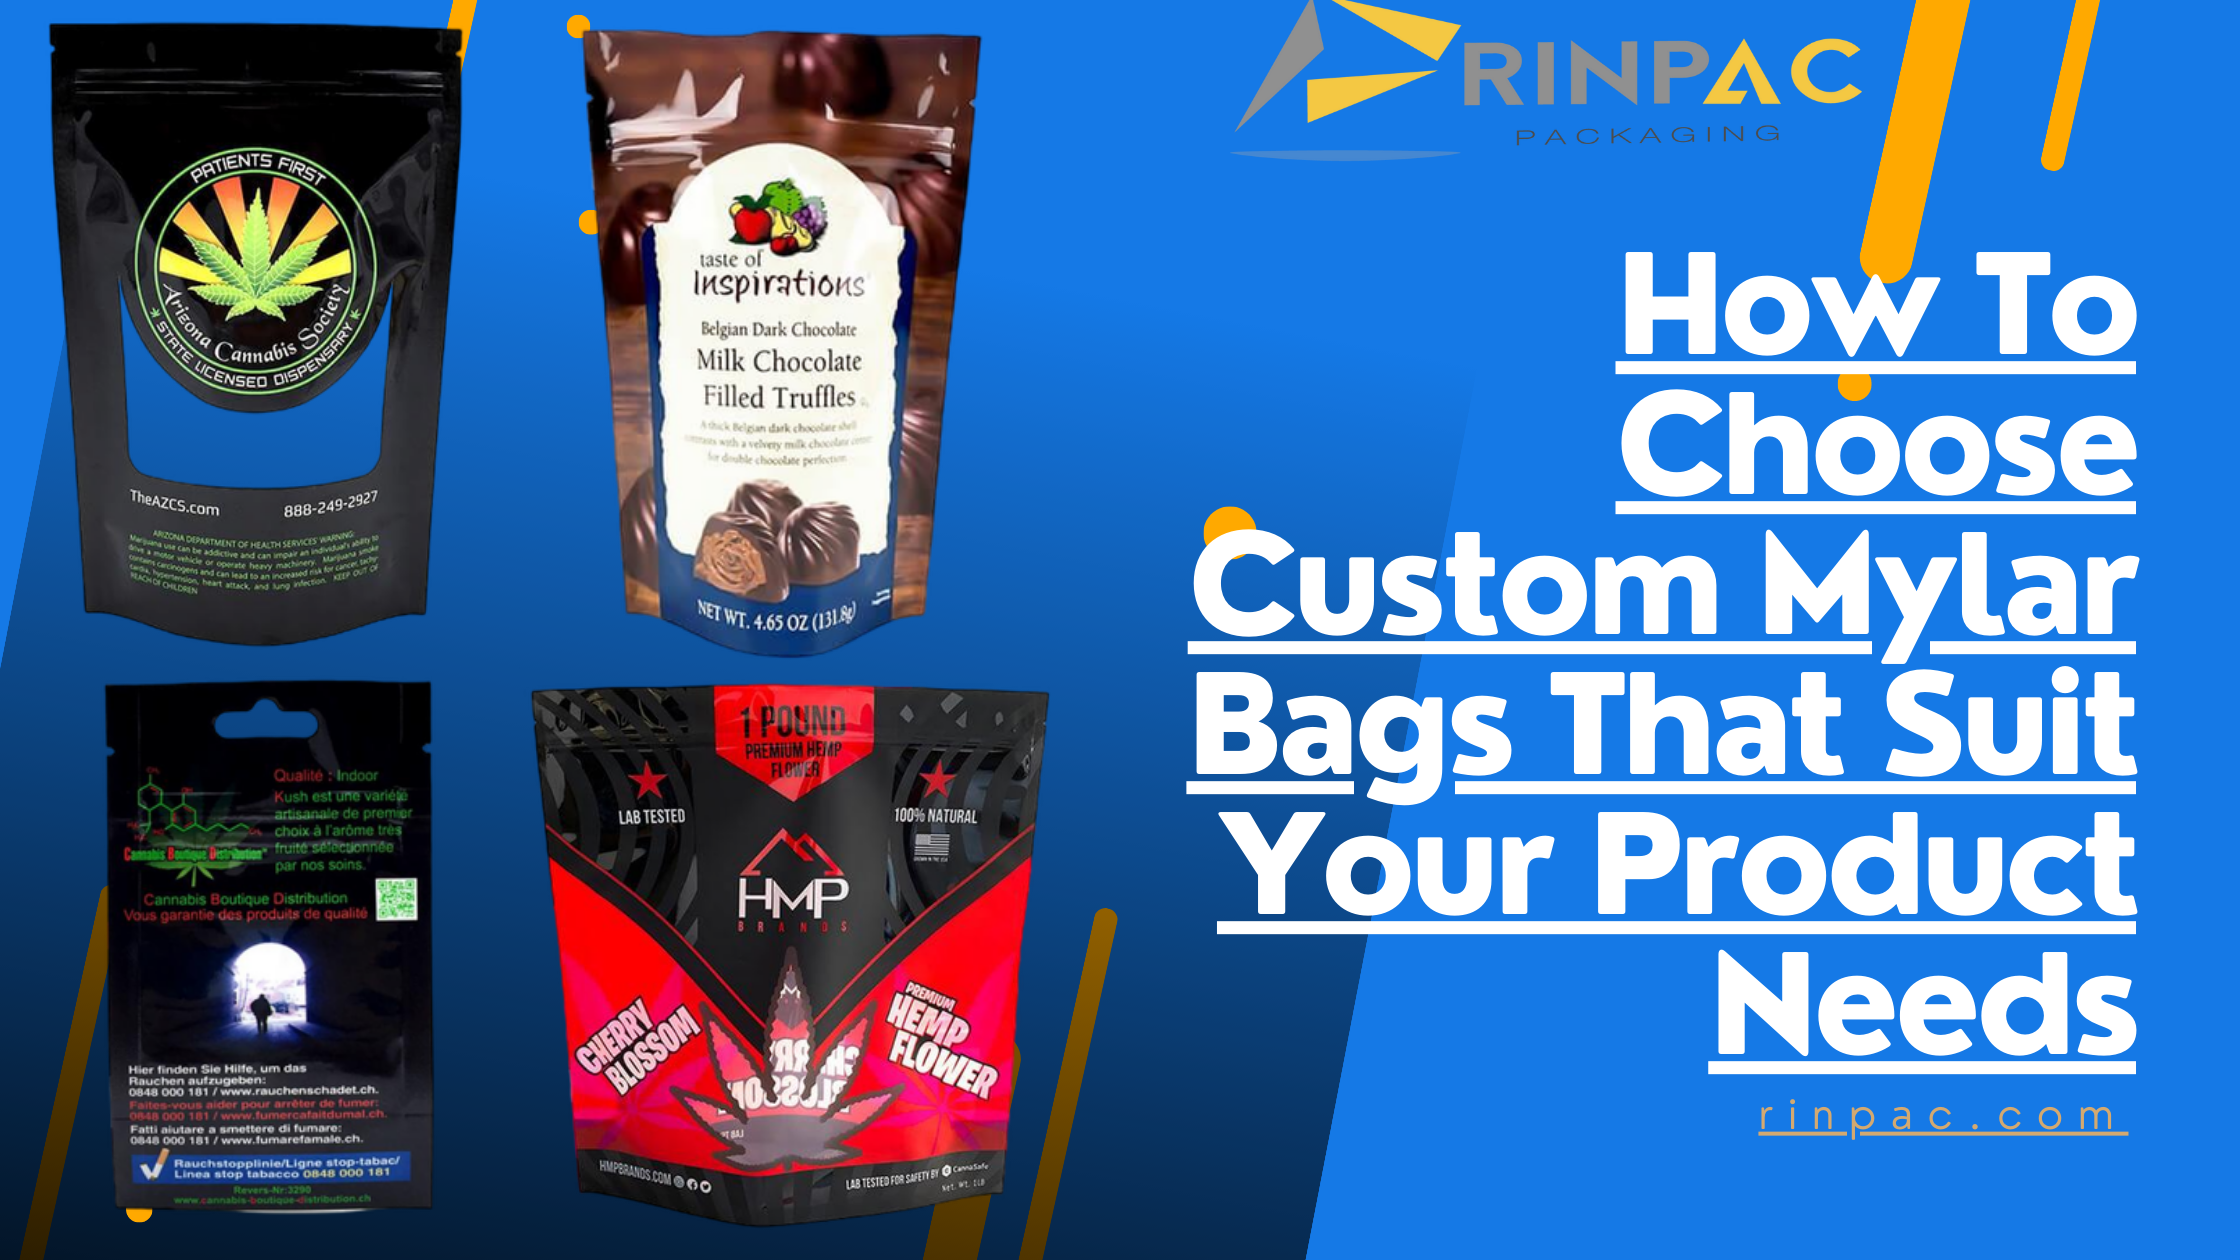 How To Choose Custom Mylar Bags That Suit Your Product Needs